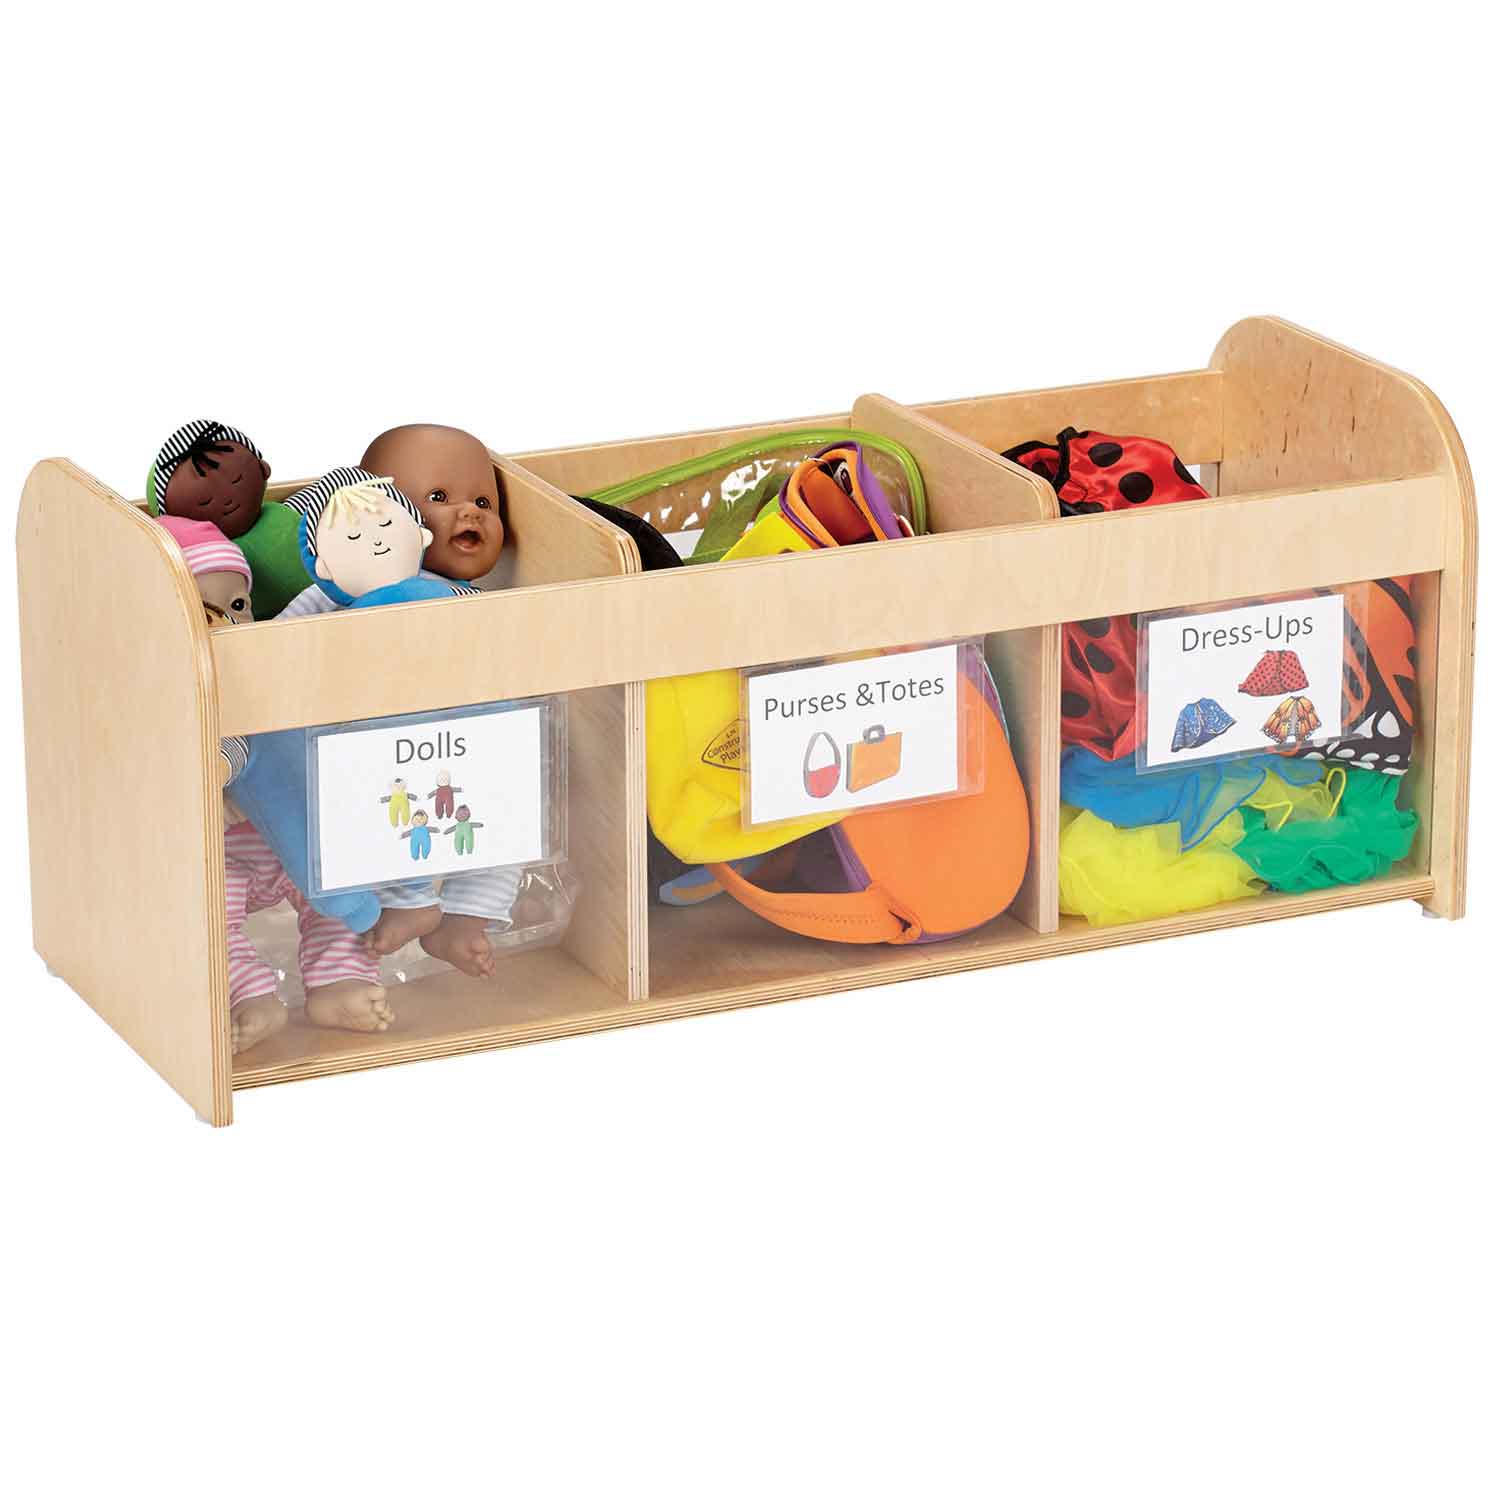 Becker's Toddler Clearview Toy Bin